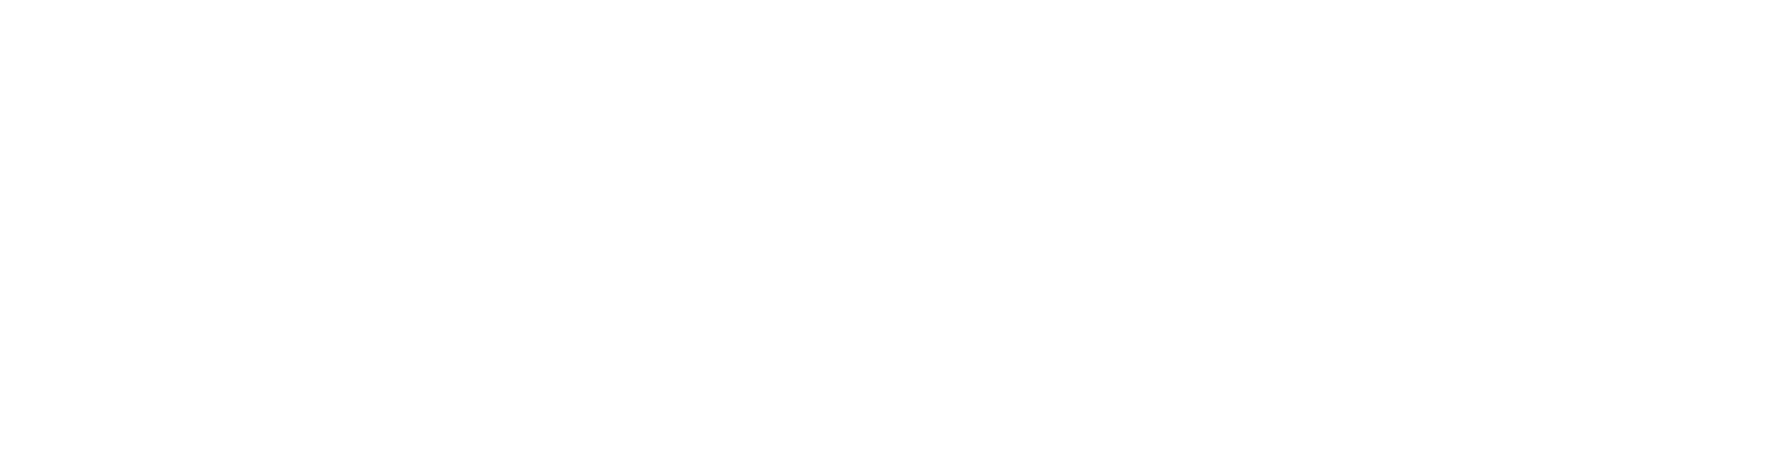 City of New Orleans Office of Gun Violence Prevention